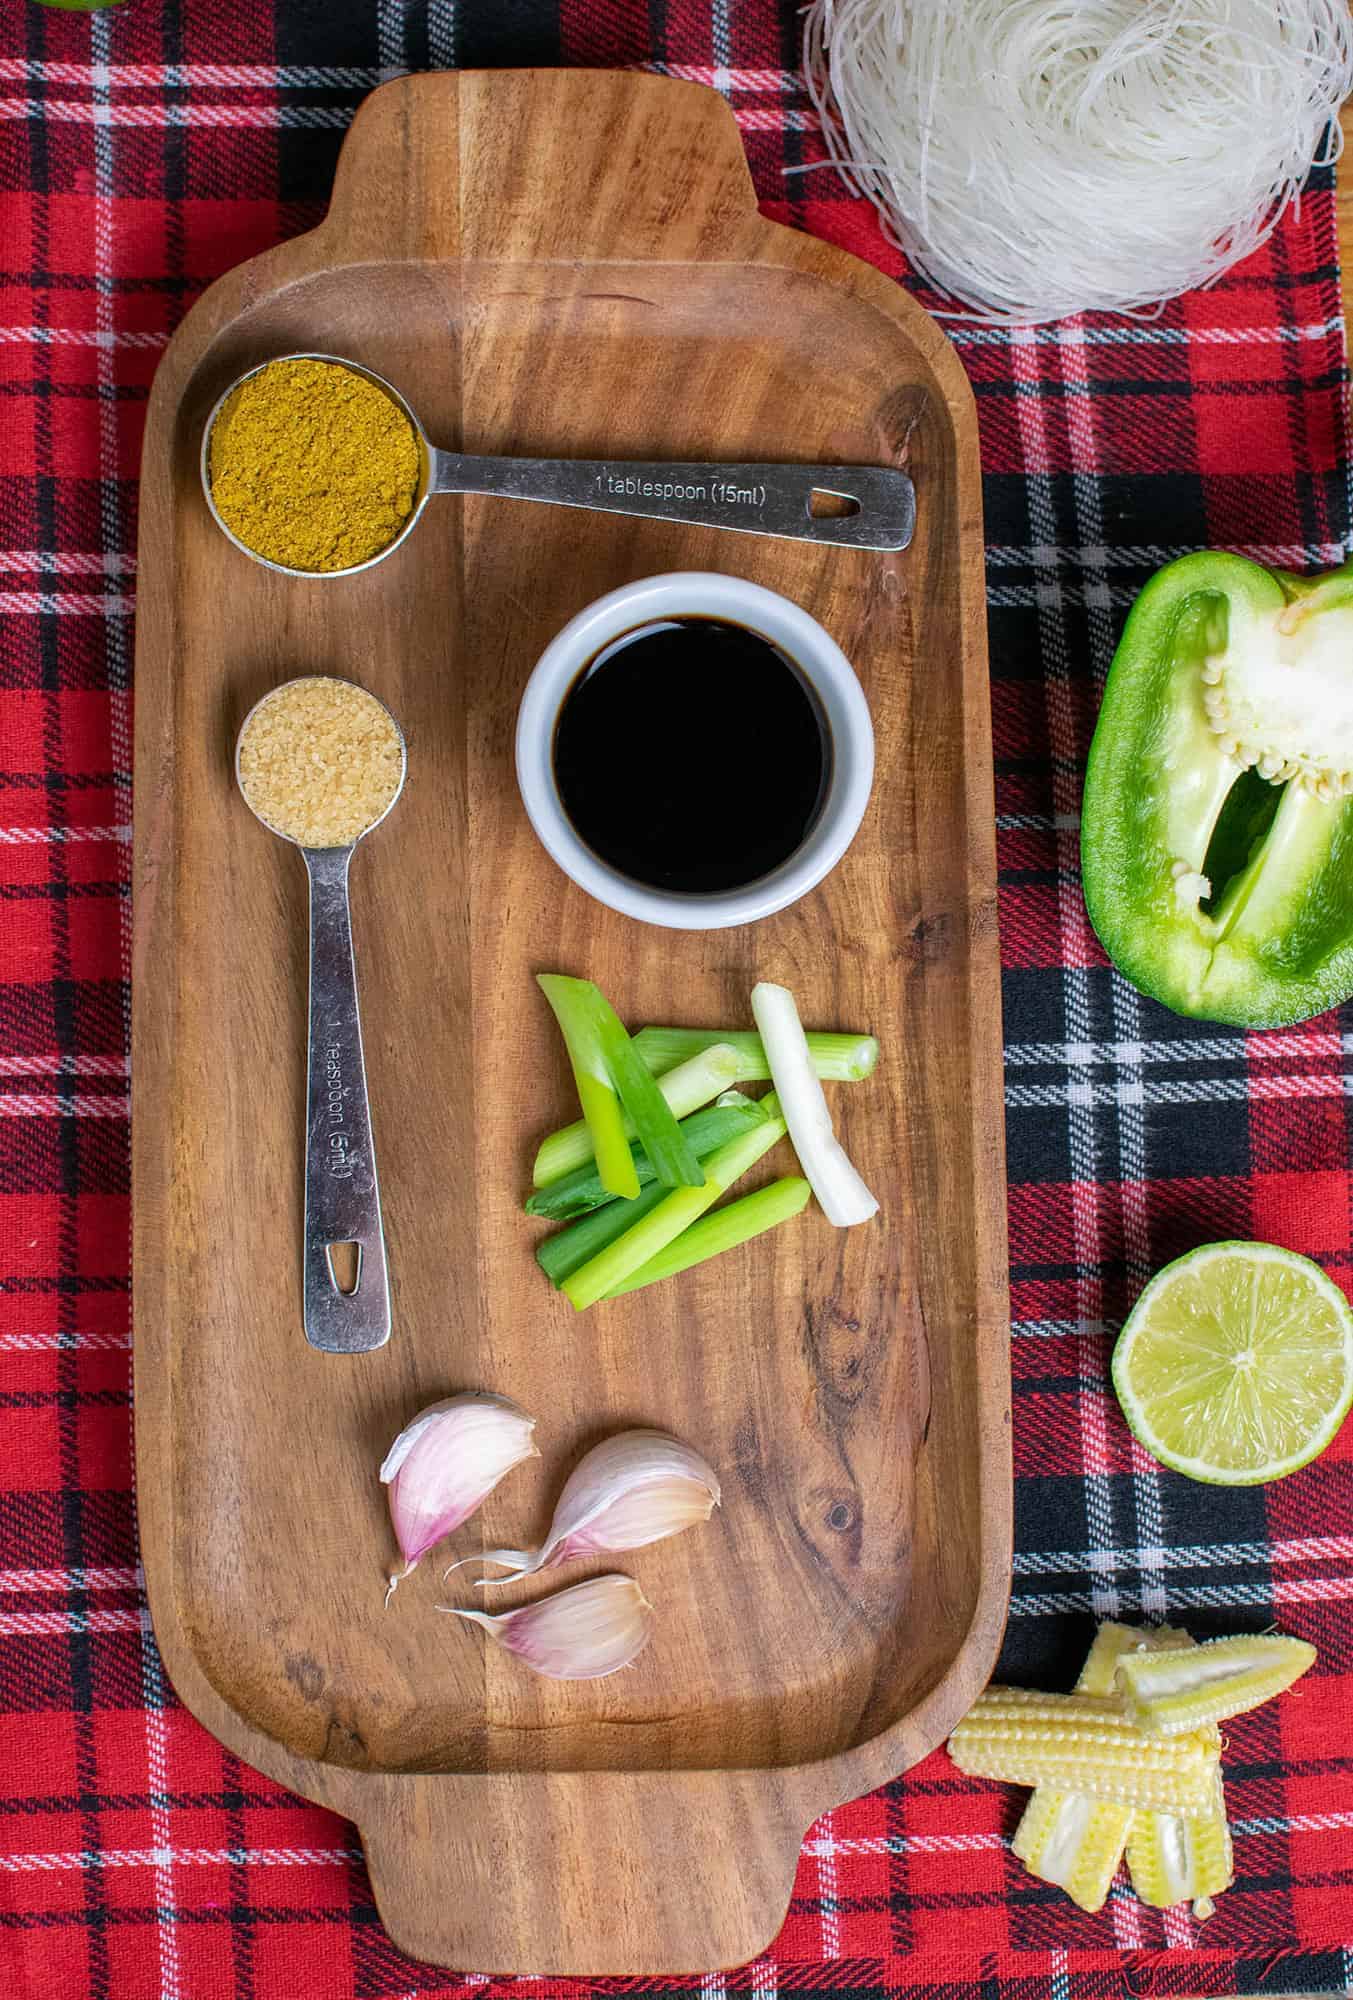 Ingredients for this stir fry laid out on a wooden tray.